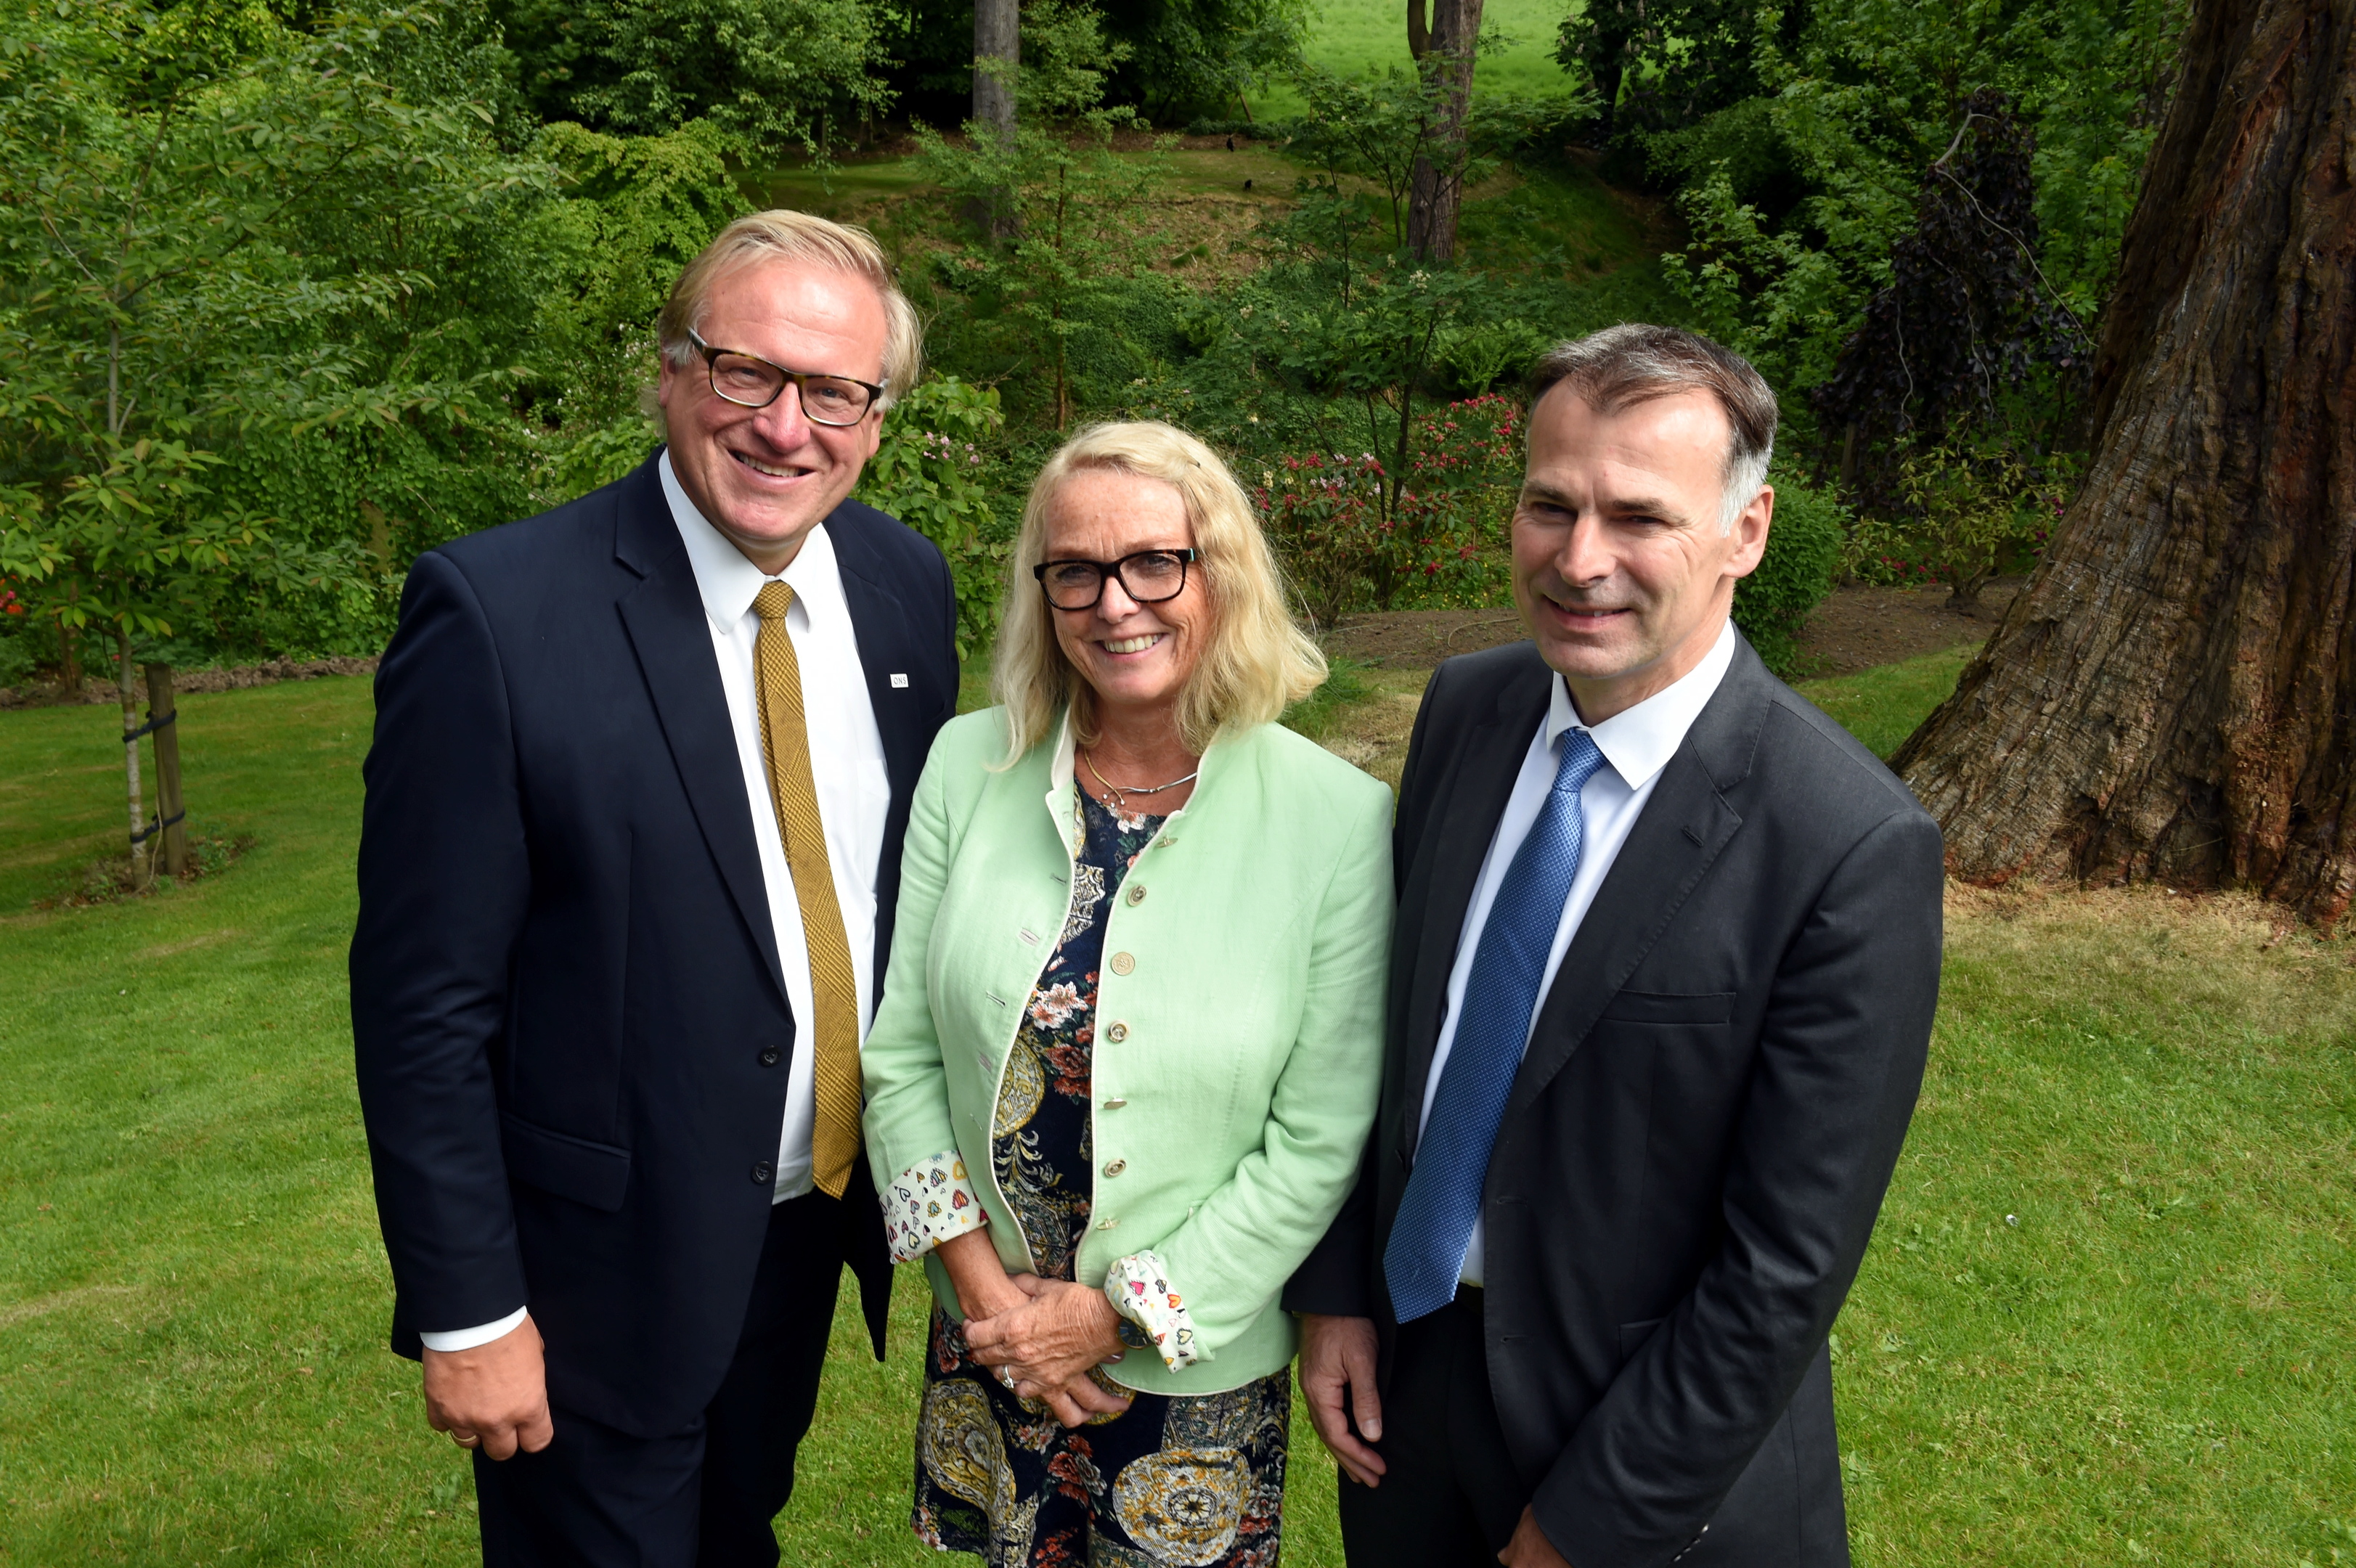 From left: Leif Johan Sevland, president and CEO of ONS: Lise Dean, sales and distribution director of Wideroe and Jamie Stark, partner in Burness Paull's corporate finance division.